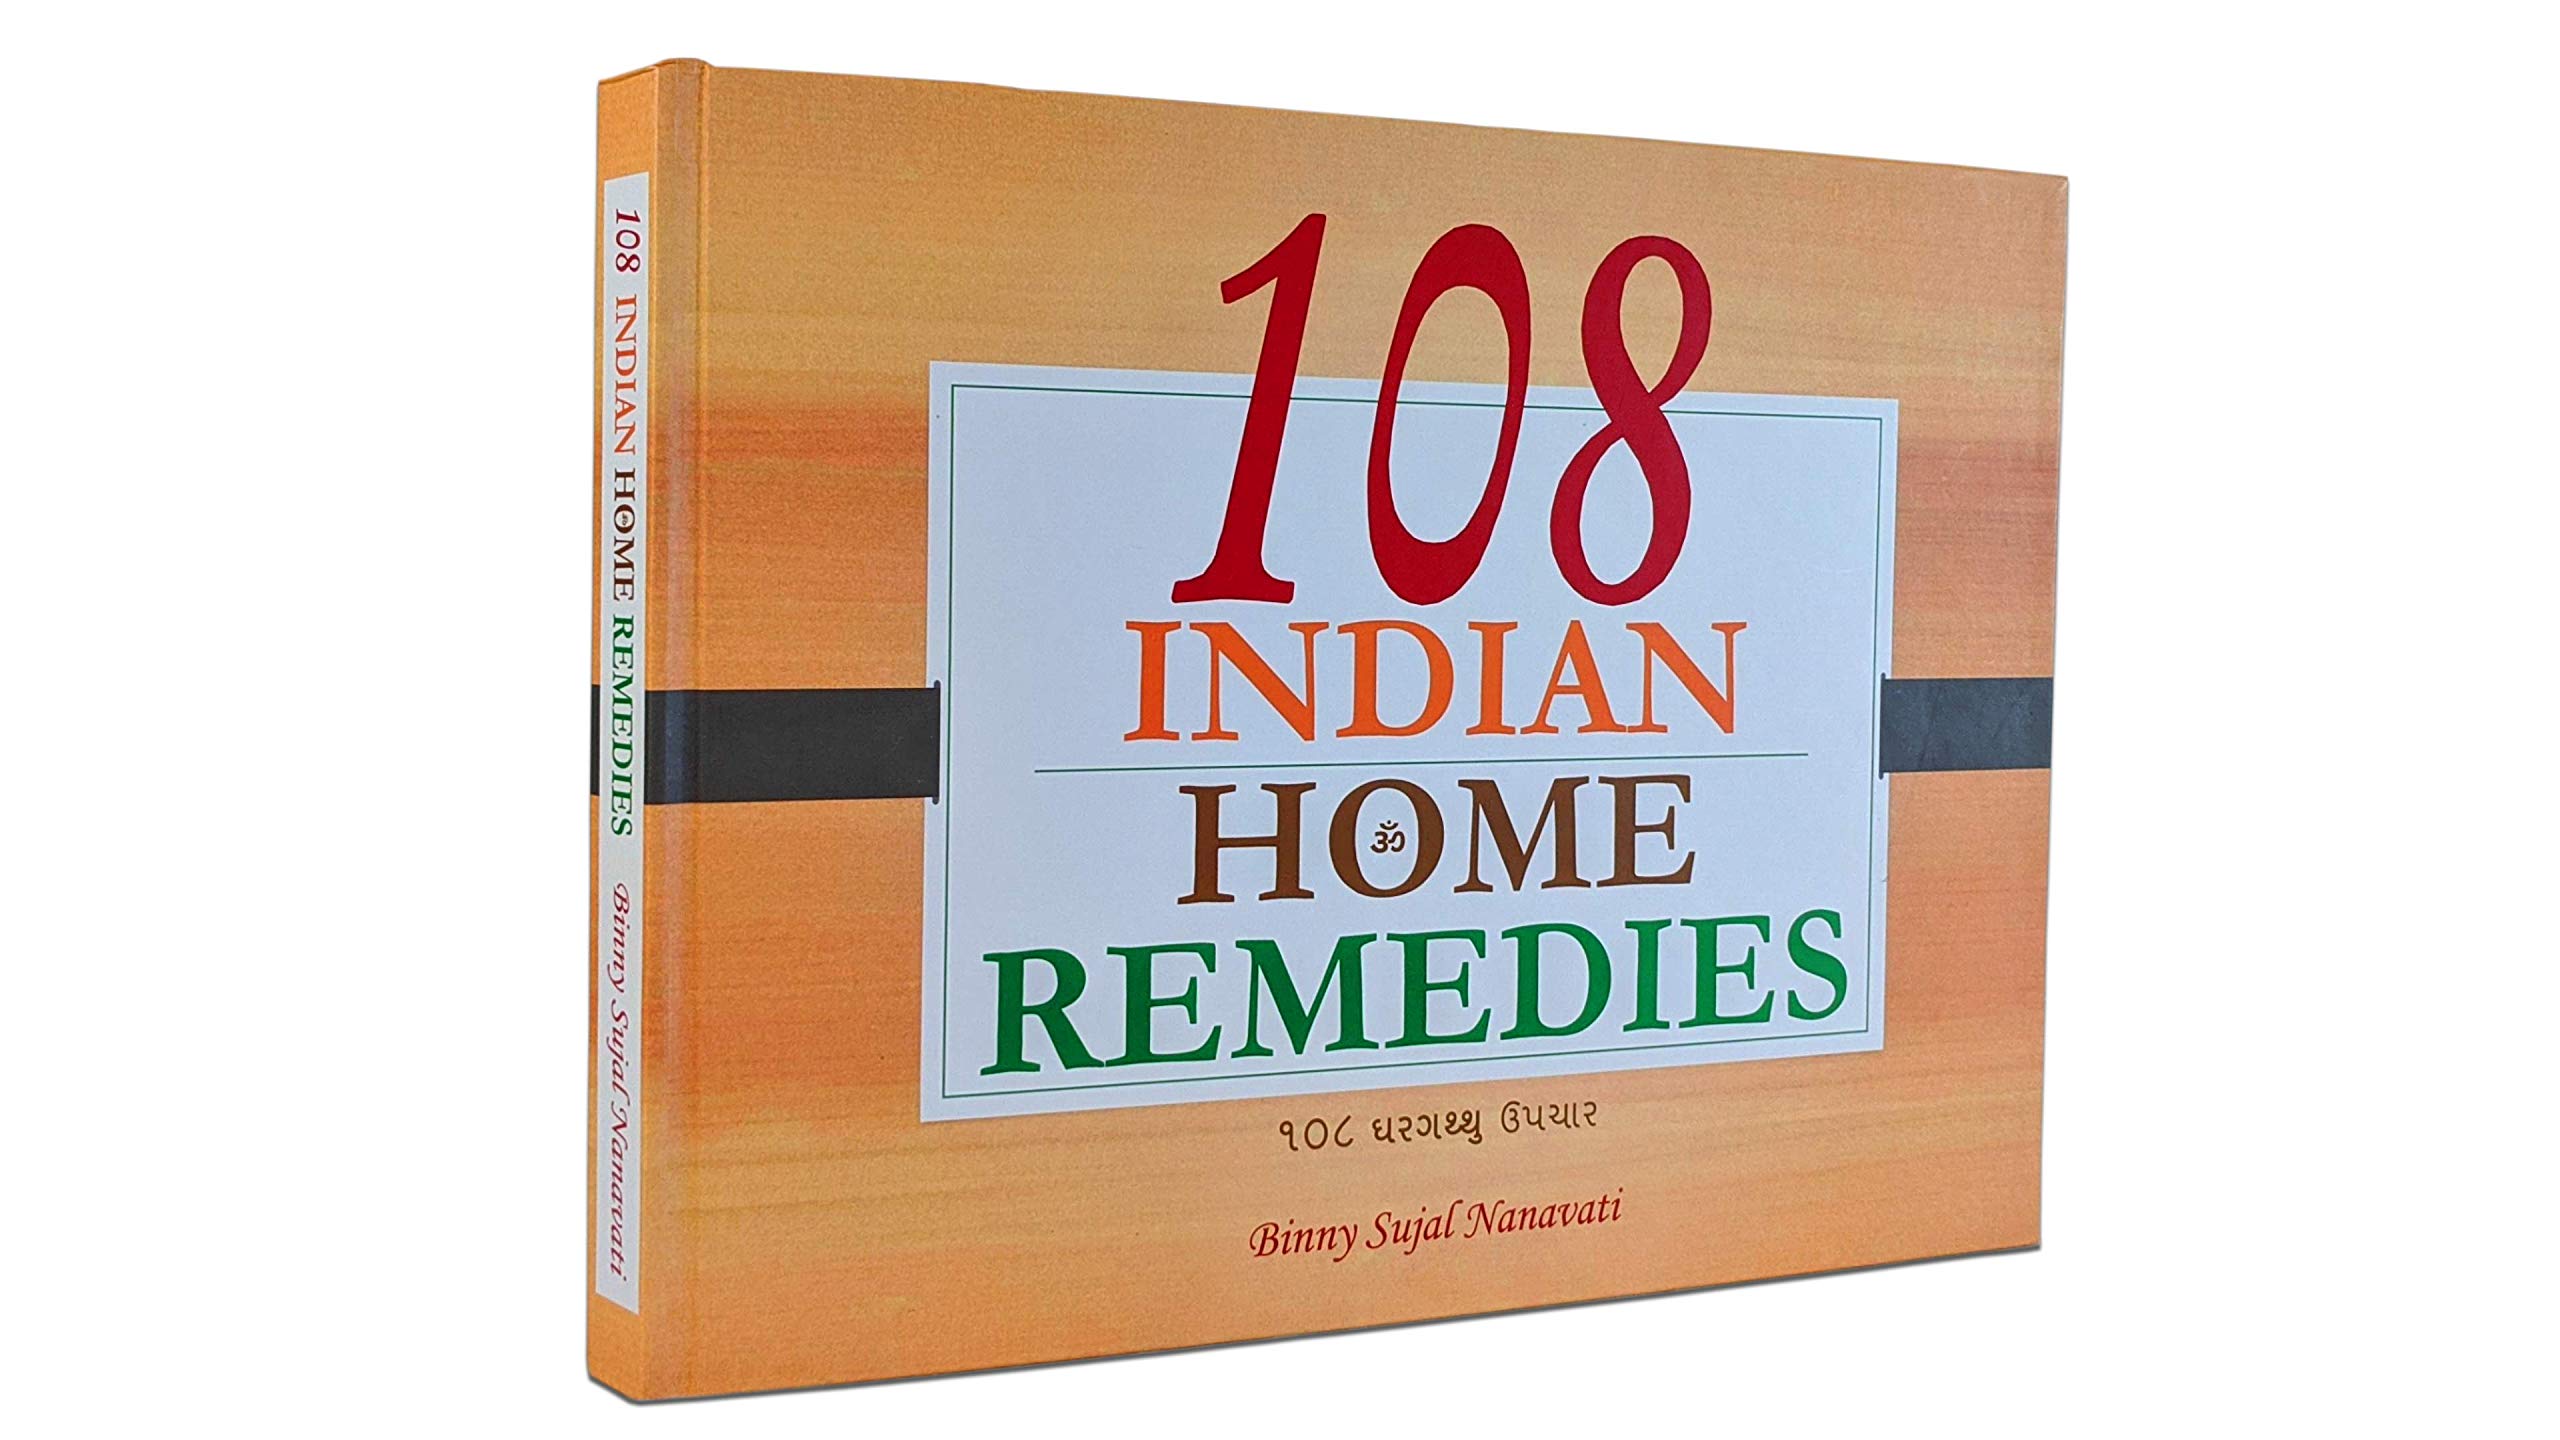 108 Indian Home Remedies